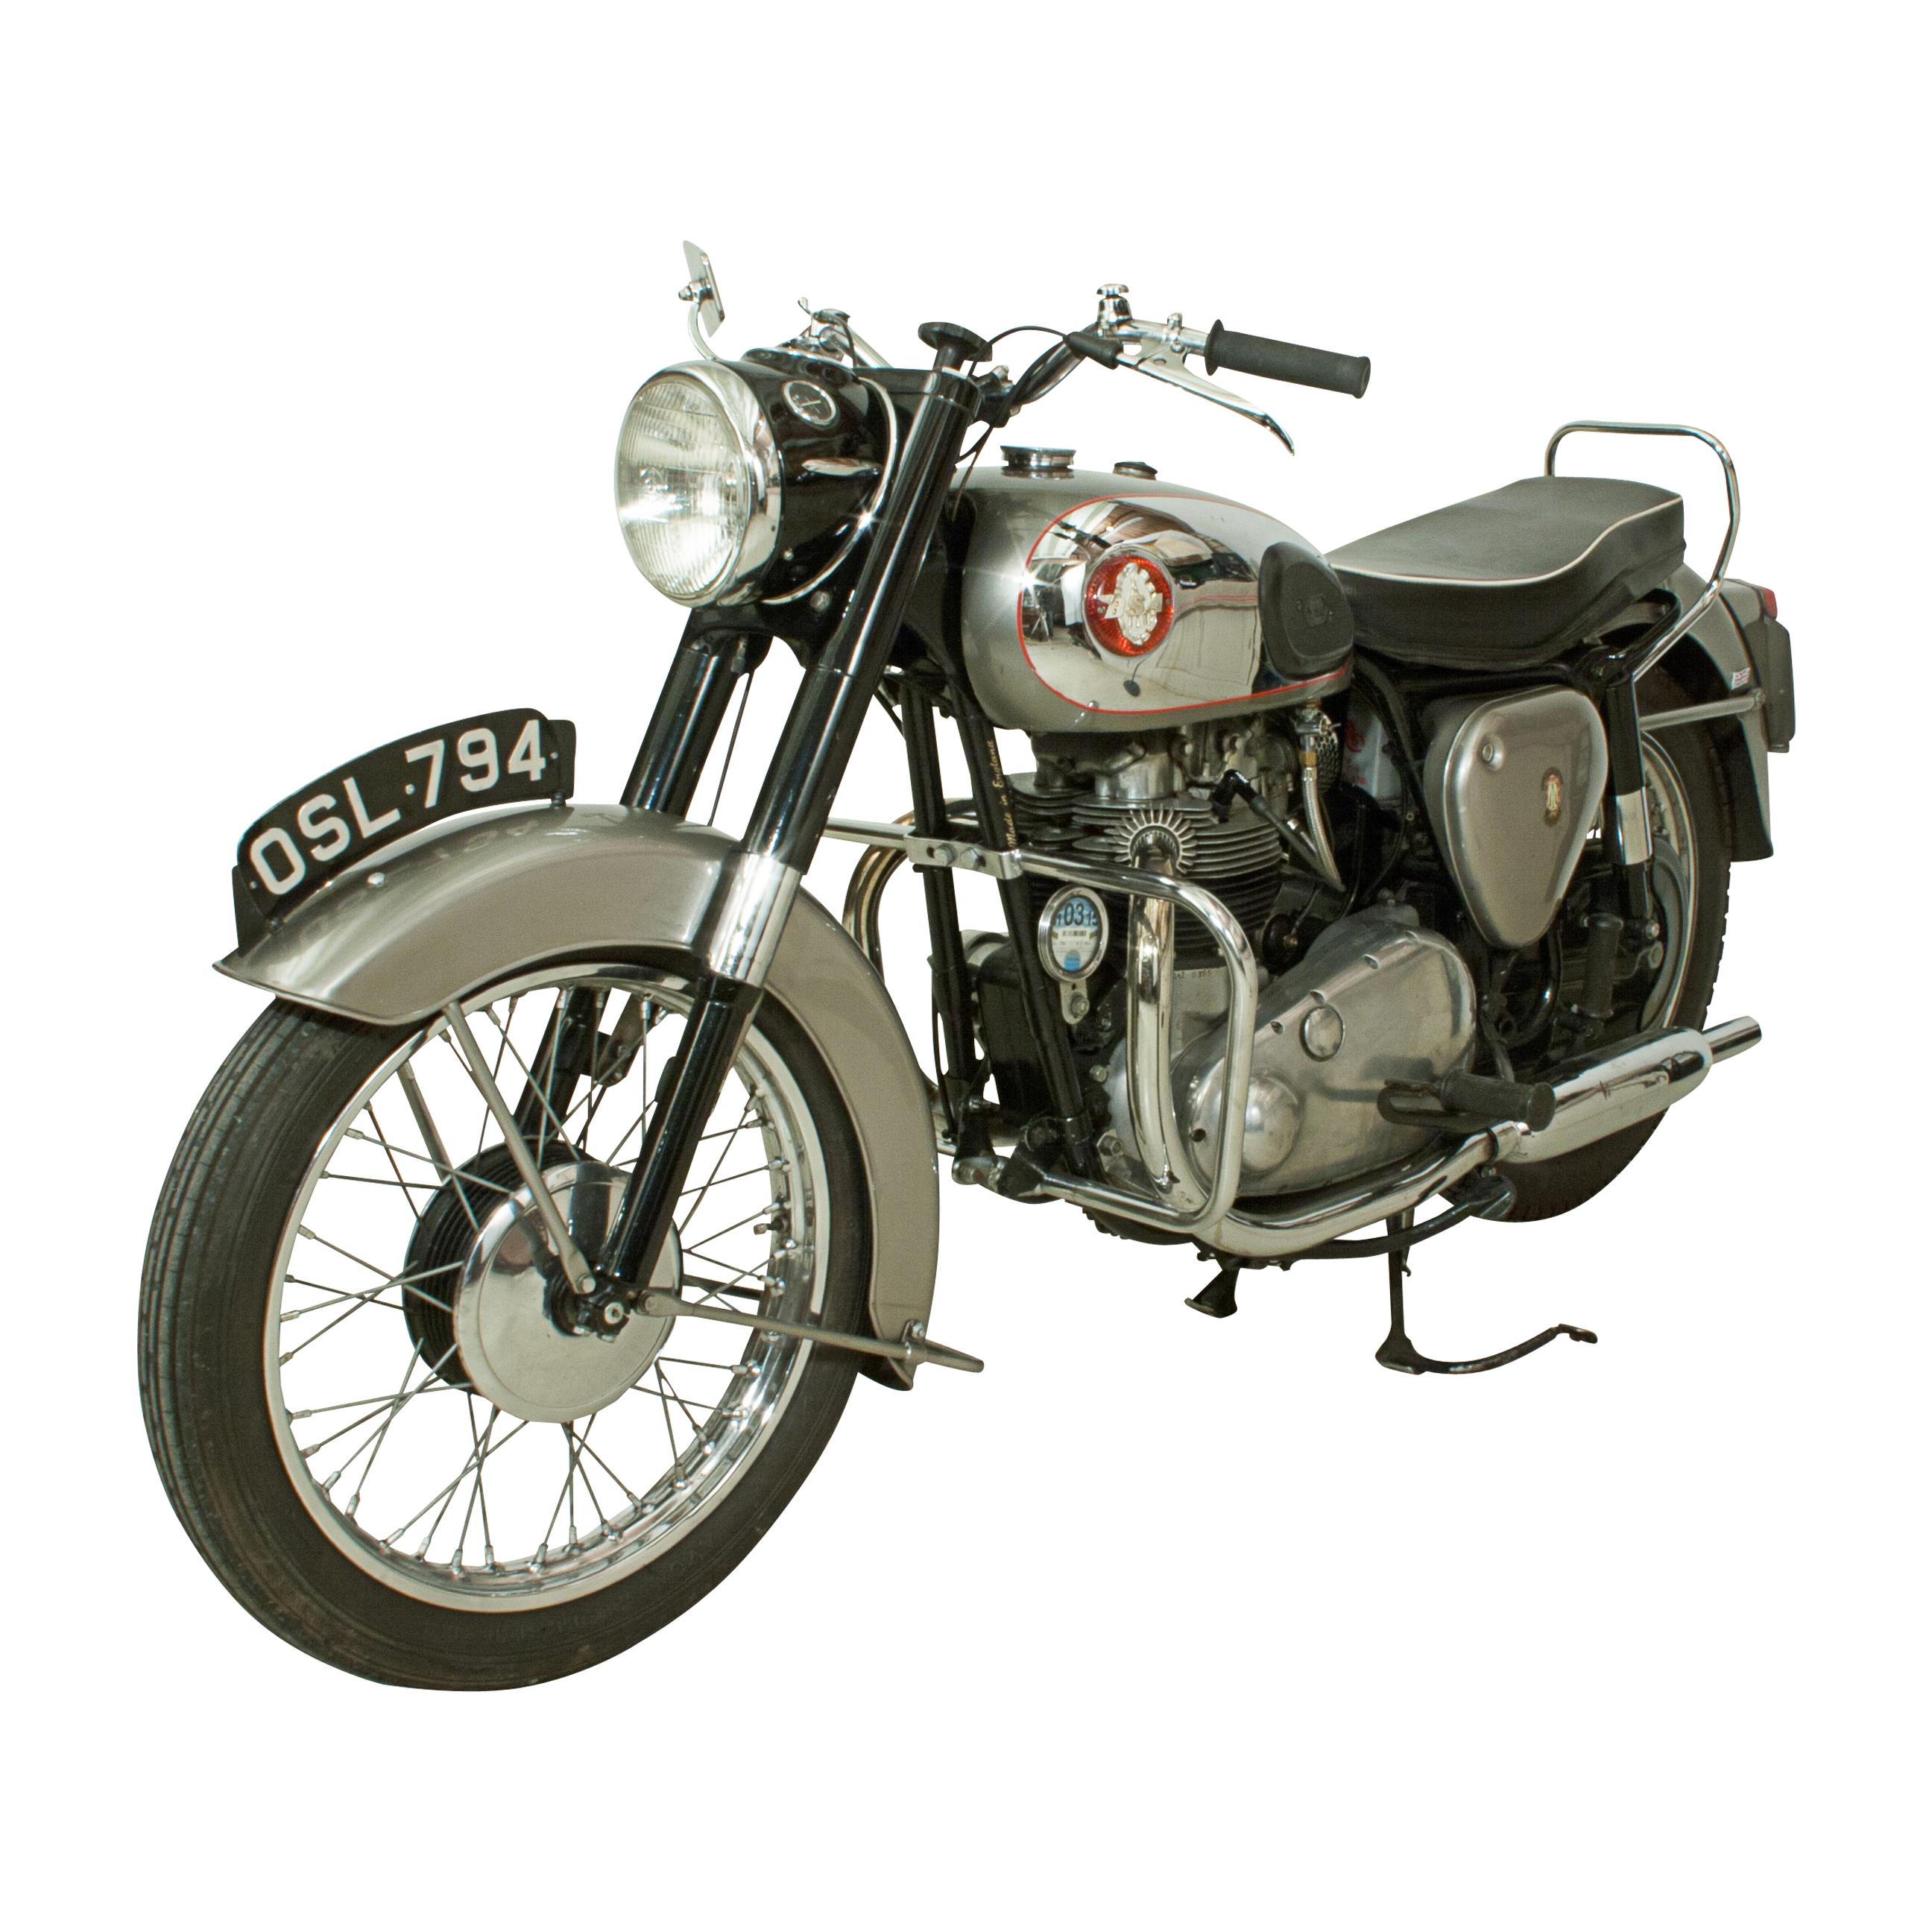 bsa motorcycle for sale